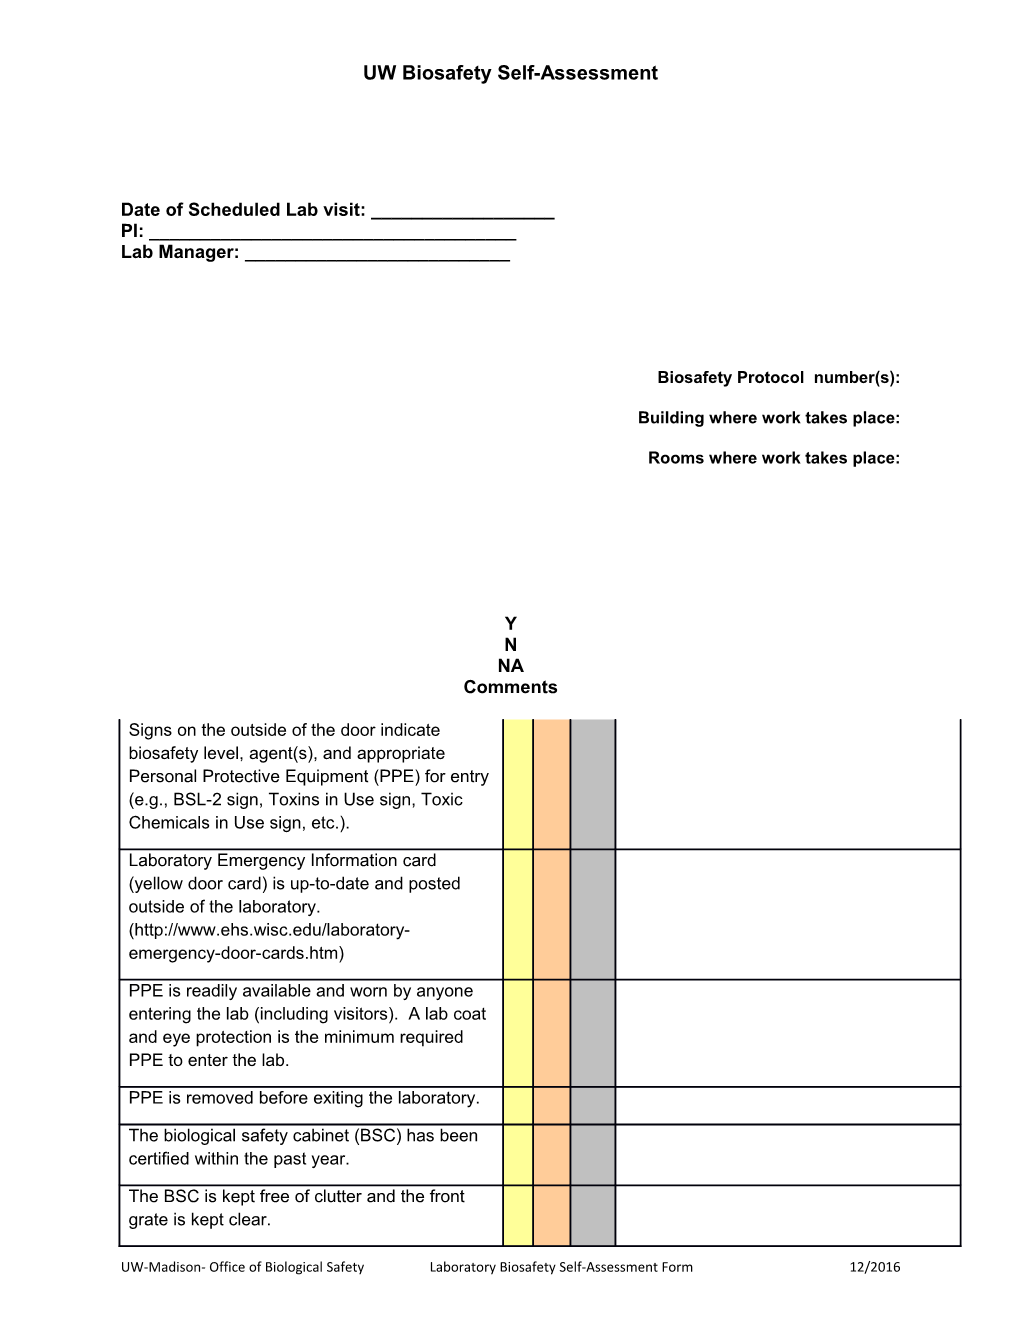 UW-Madison- Office of Biological Safetylaboratory Biosafety Self-Assessment Form12/2016